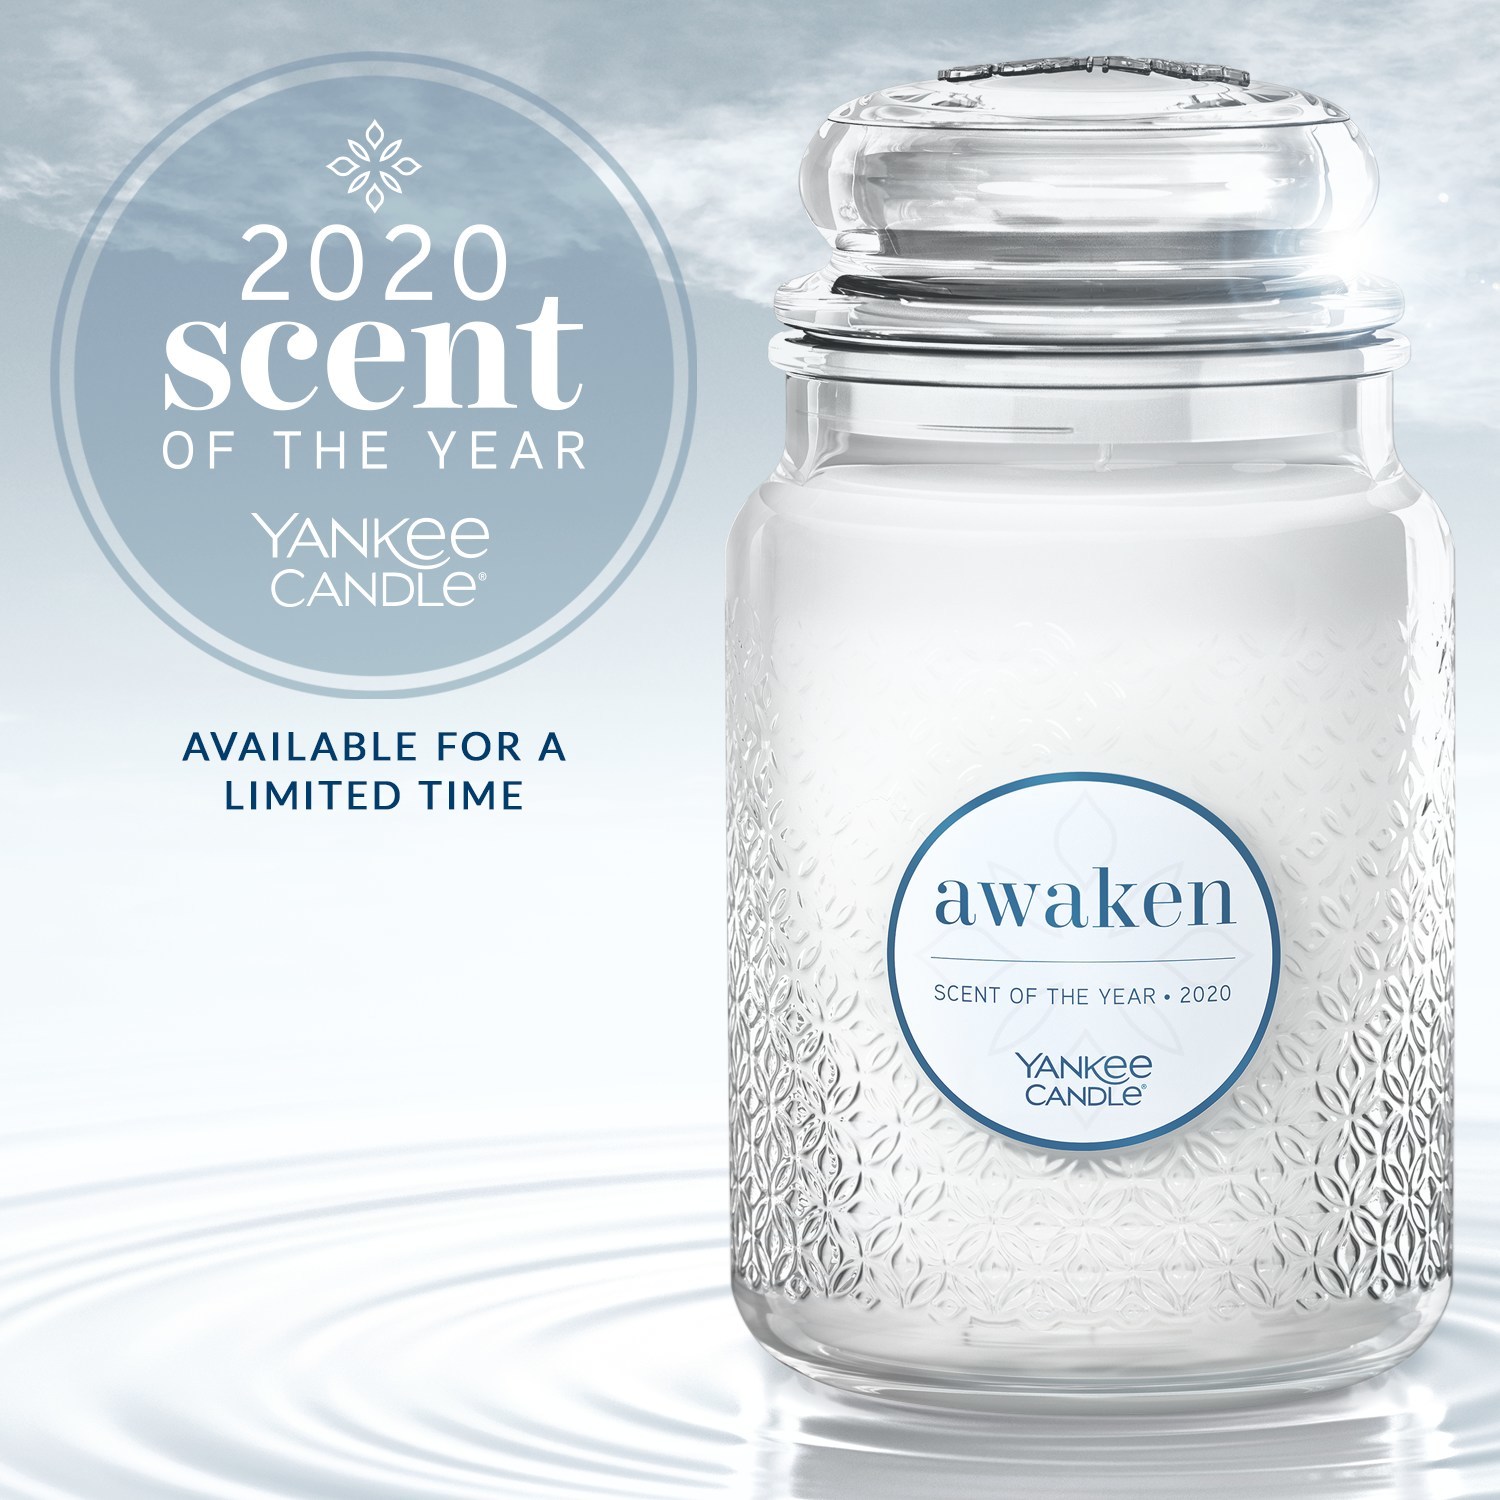 Yankee Candle Launches The Scent Of The Year